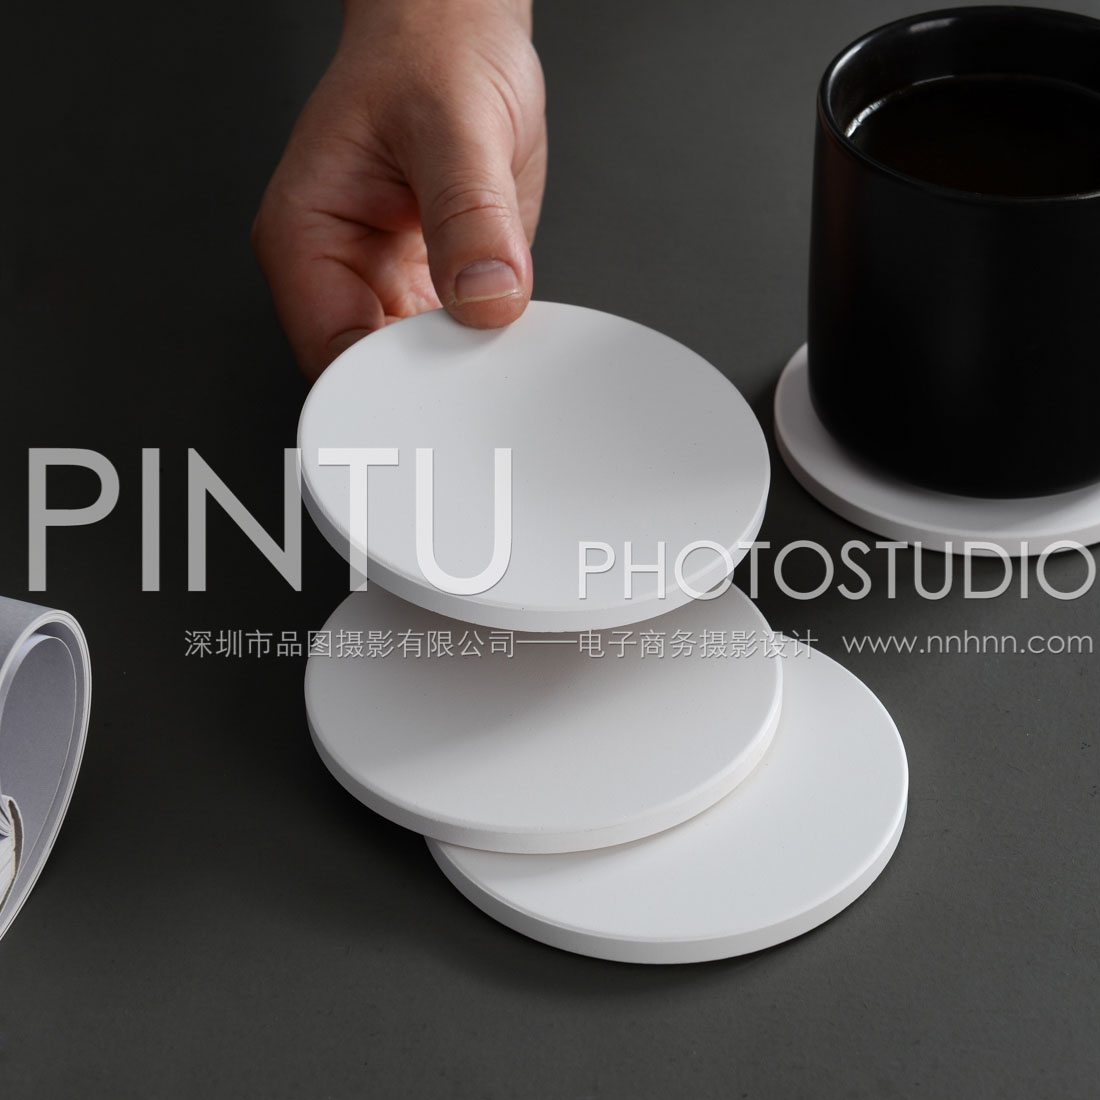 The best product photography in China Lifestyle cup cushions have hands